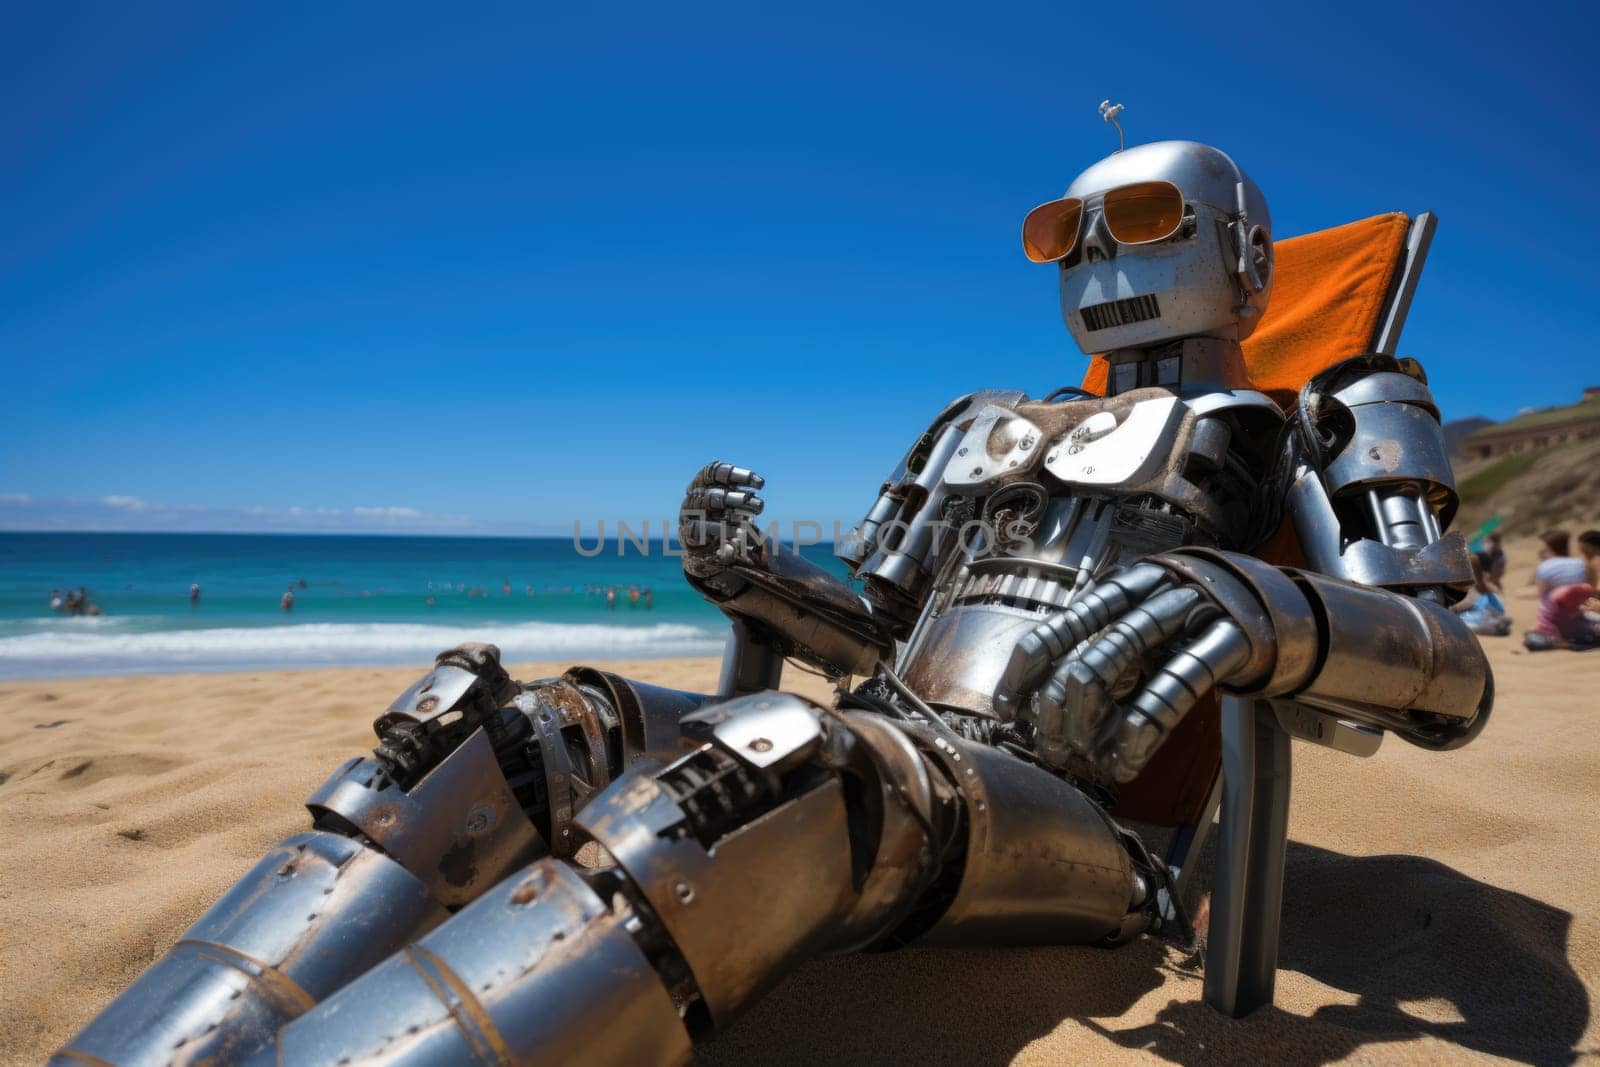 The robot is resting on a chaise longue. The robot is sunbathing on a sunny beach near the sea.